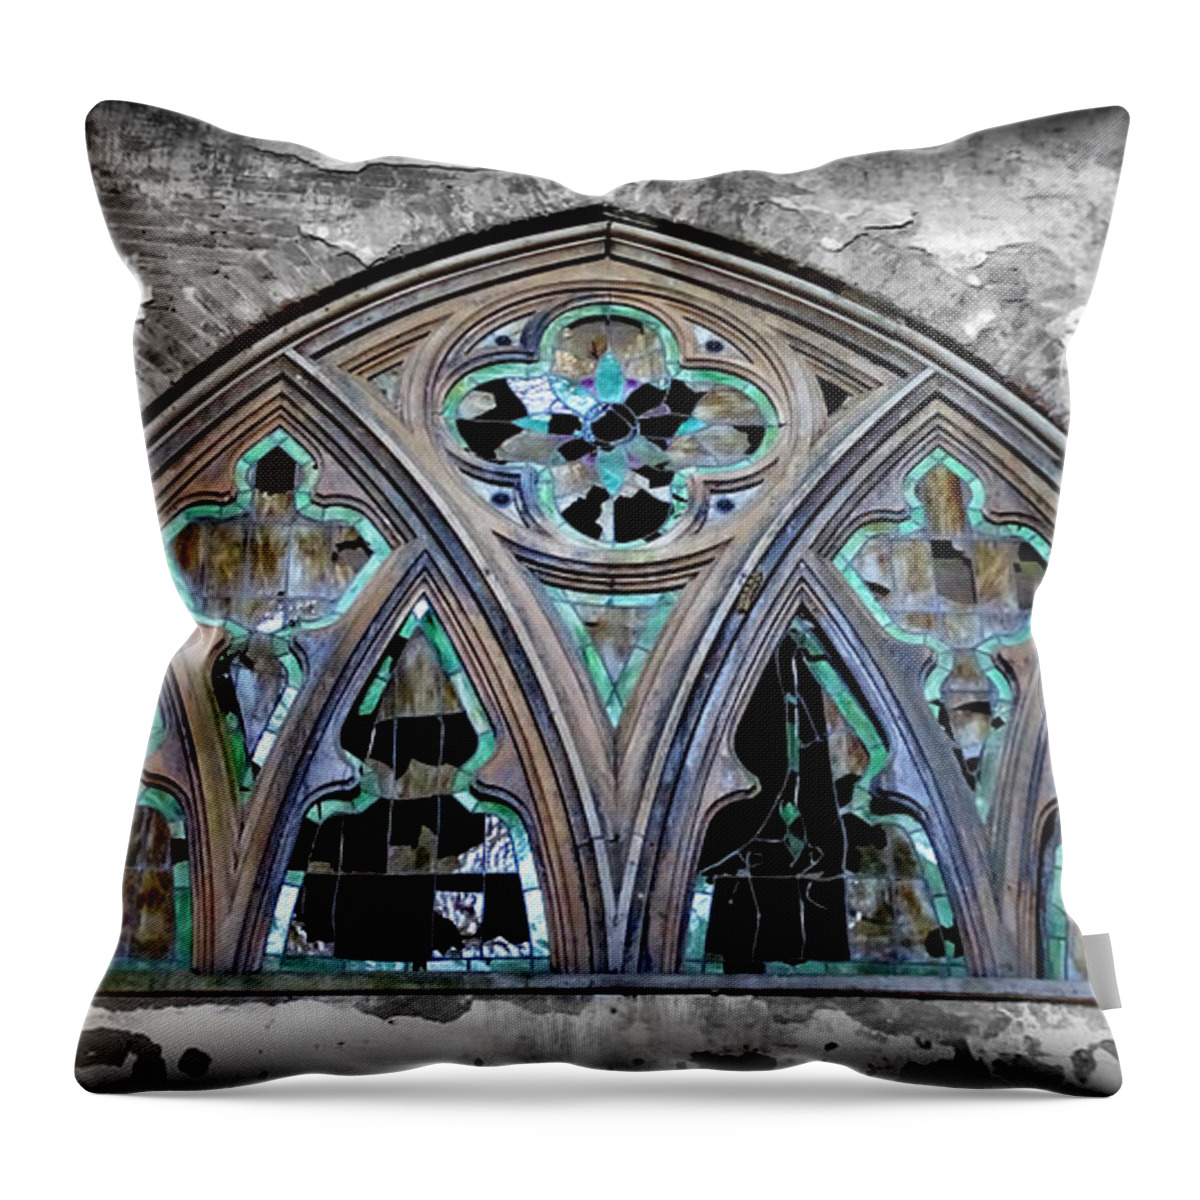 Shattered Throw Pillow featuring the photograph Shattered by Dark Whimsy